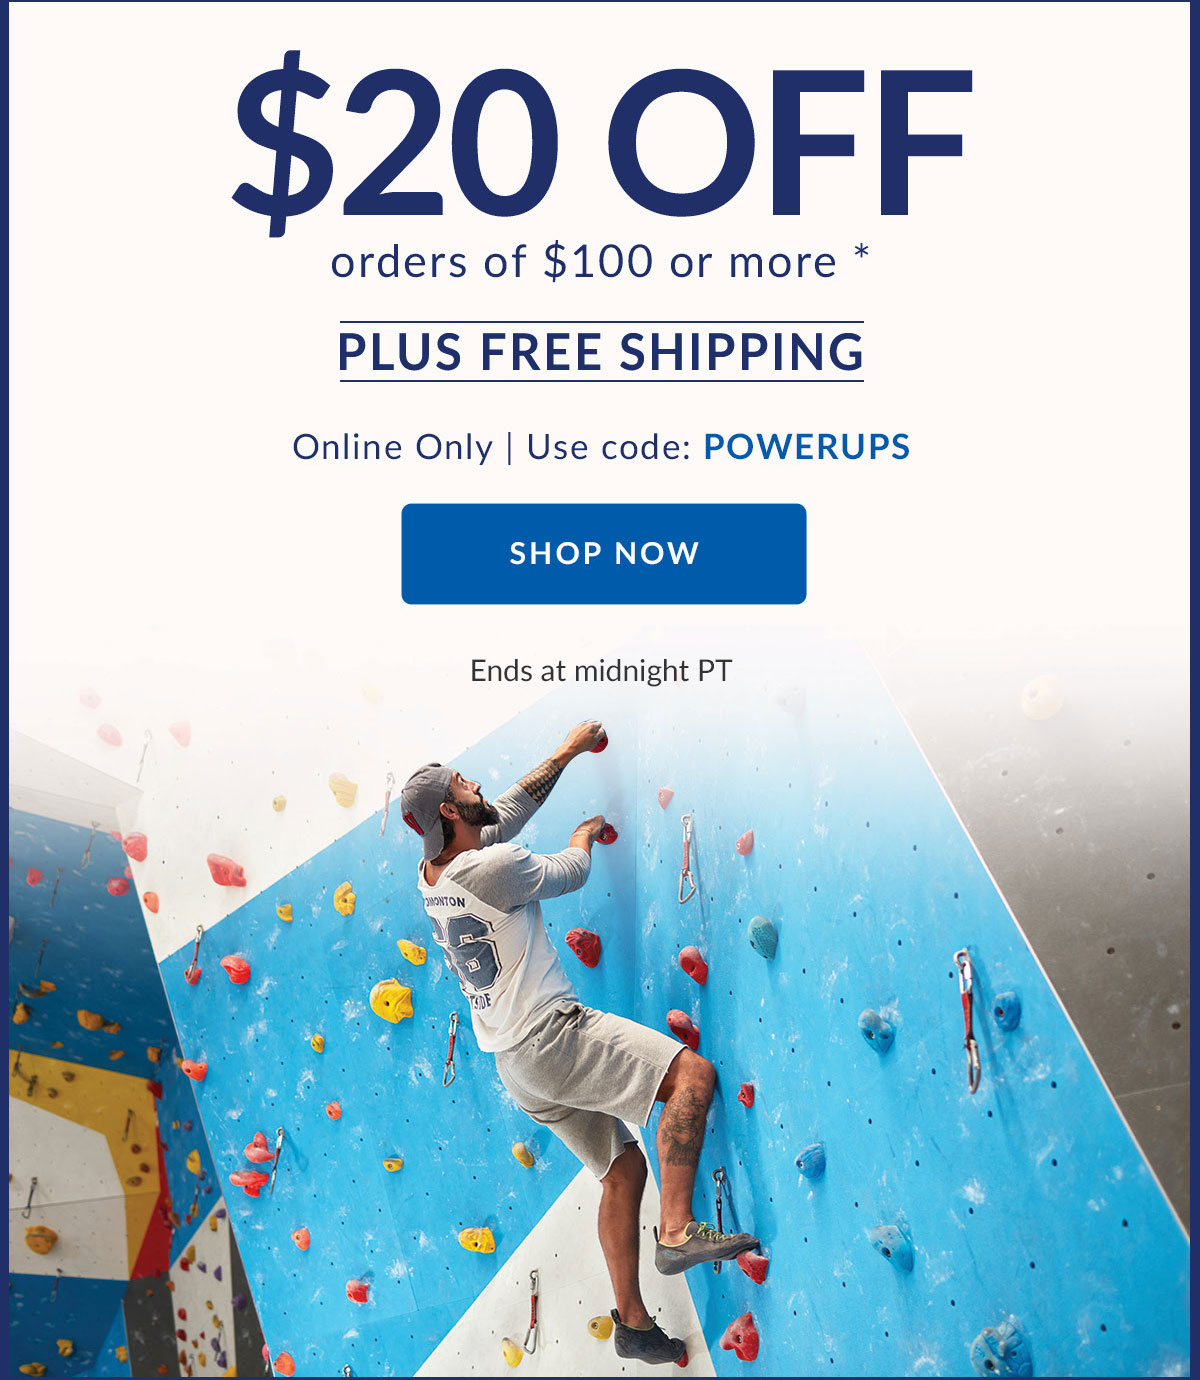 $20 OFF orders of $100 or more * | PLUS FREE SHIPPING Online Only | Use code: POWERUPS | SHOP NOW | Ends at midnight PT